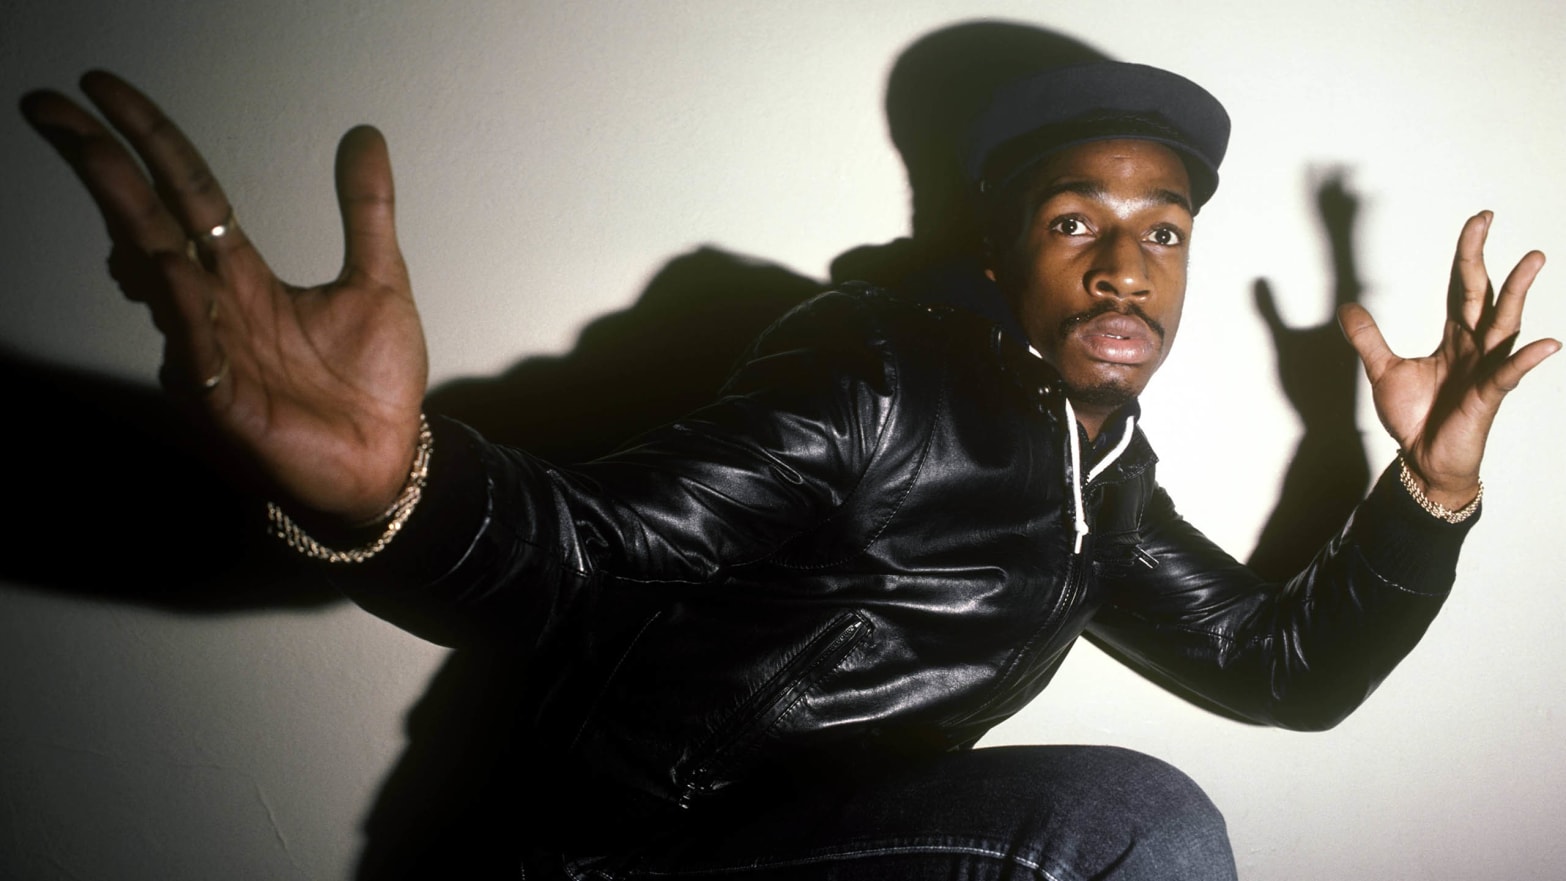 The Legacy of Grandmaster Flash & The Furious 5